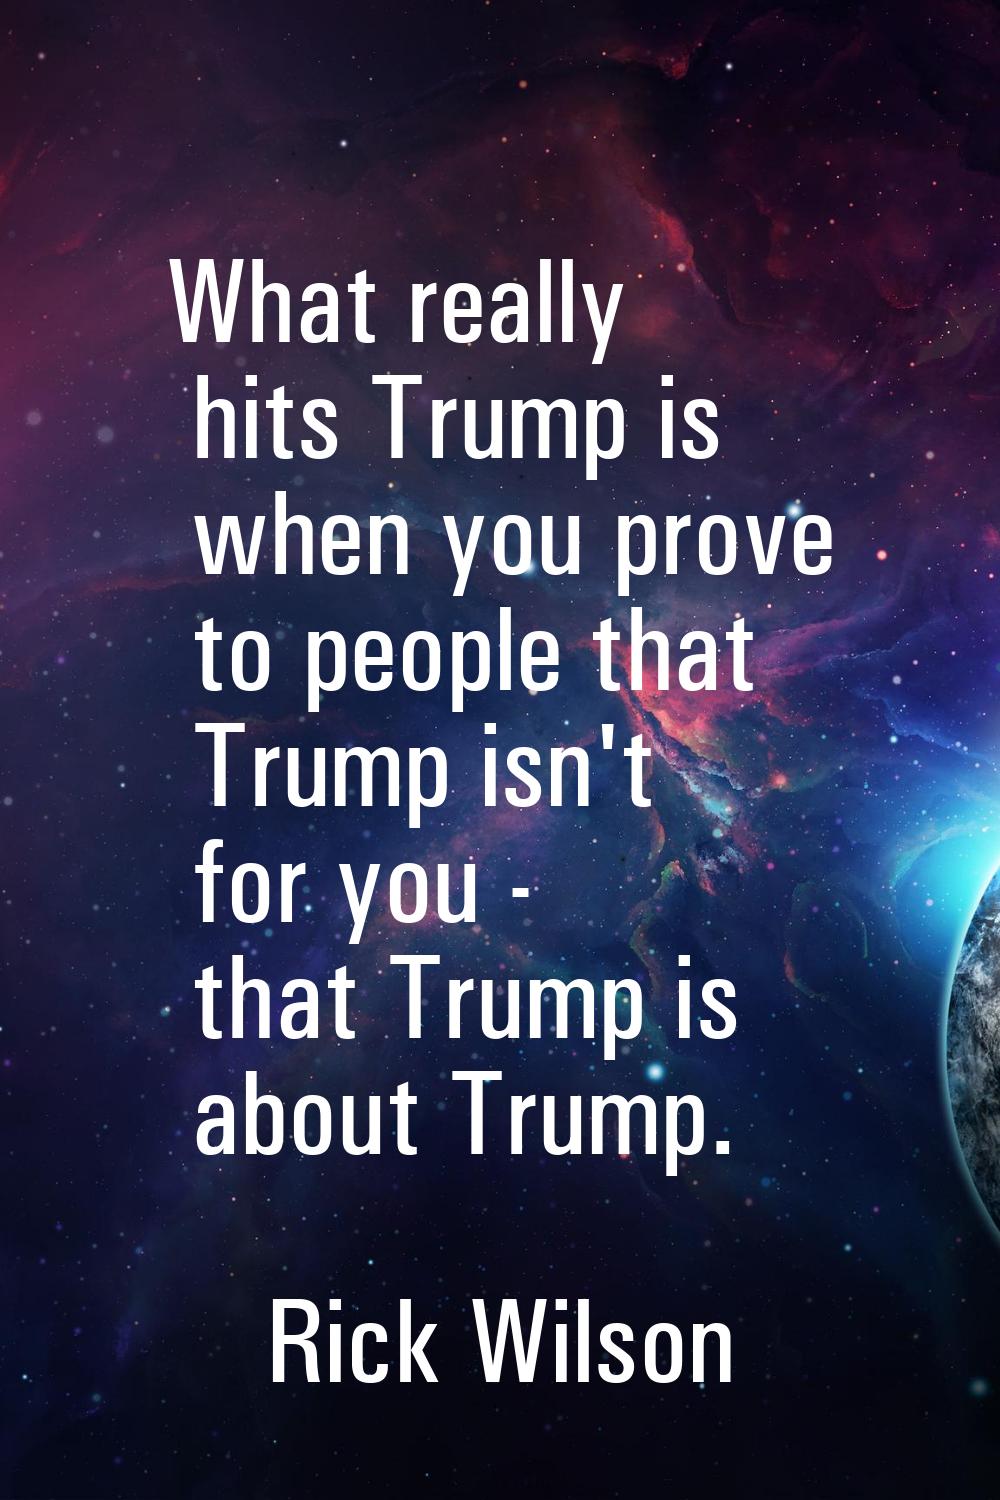 What really hits Trump is when you prove to people that Trump isn't for you - that Trump is about T